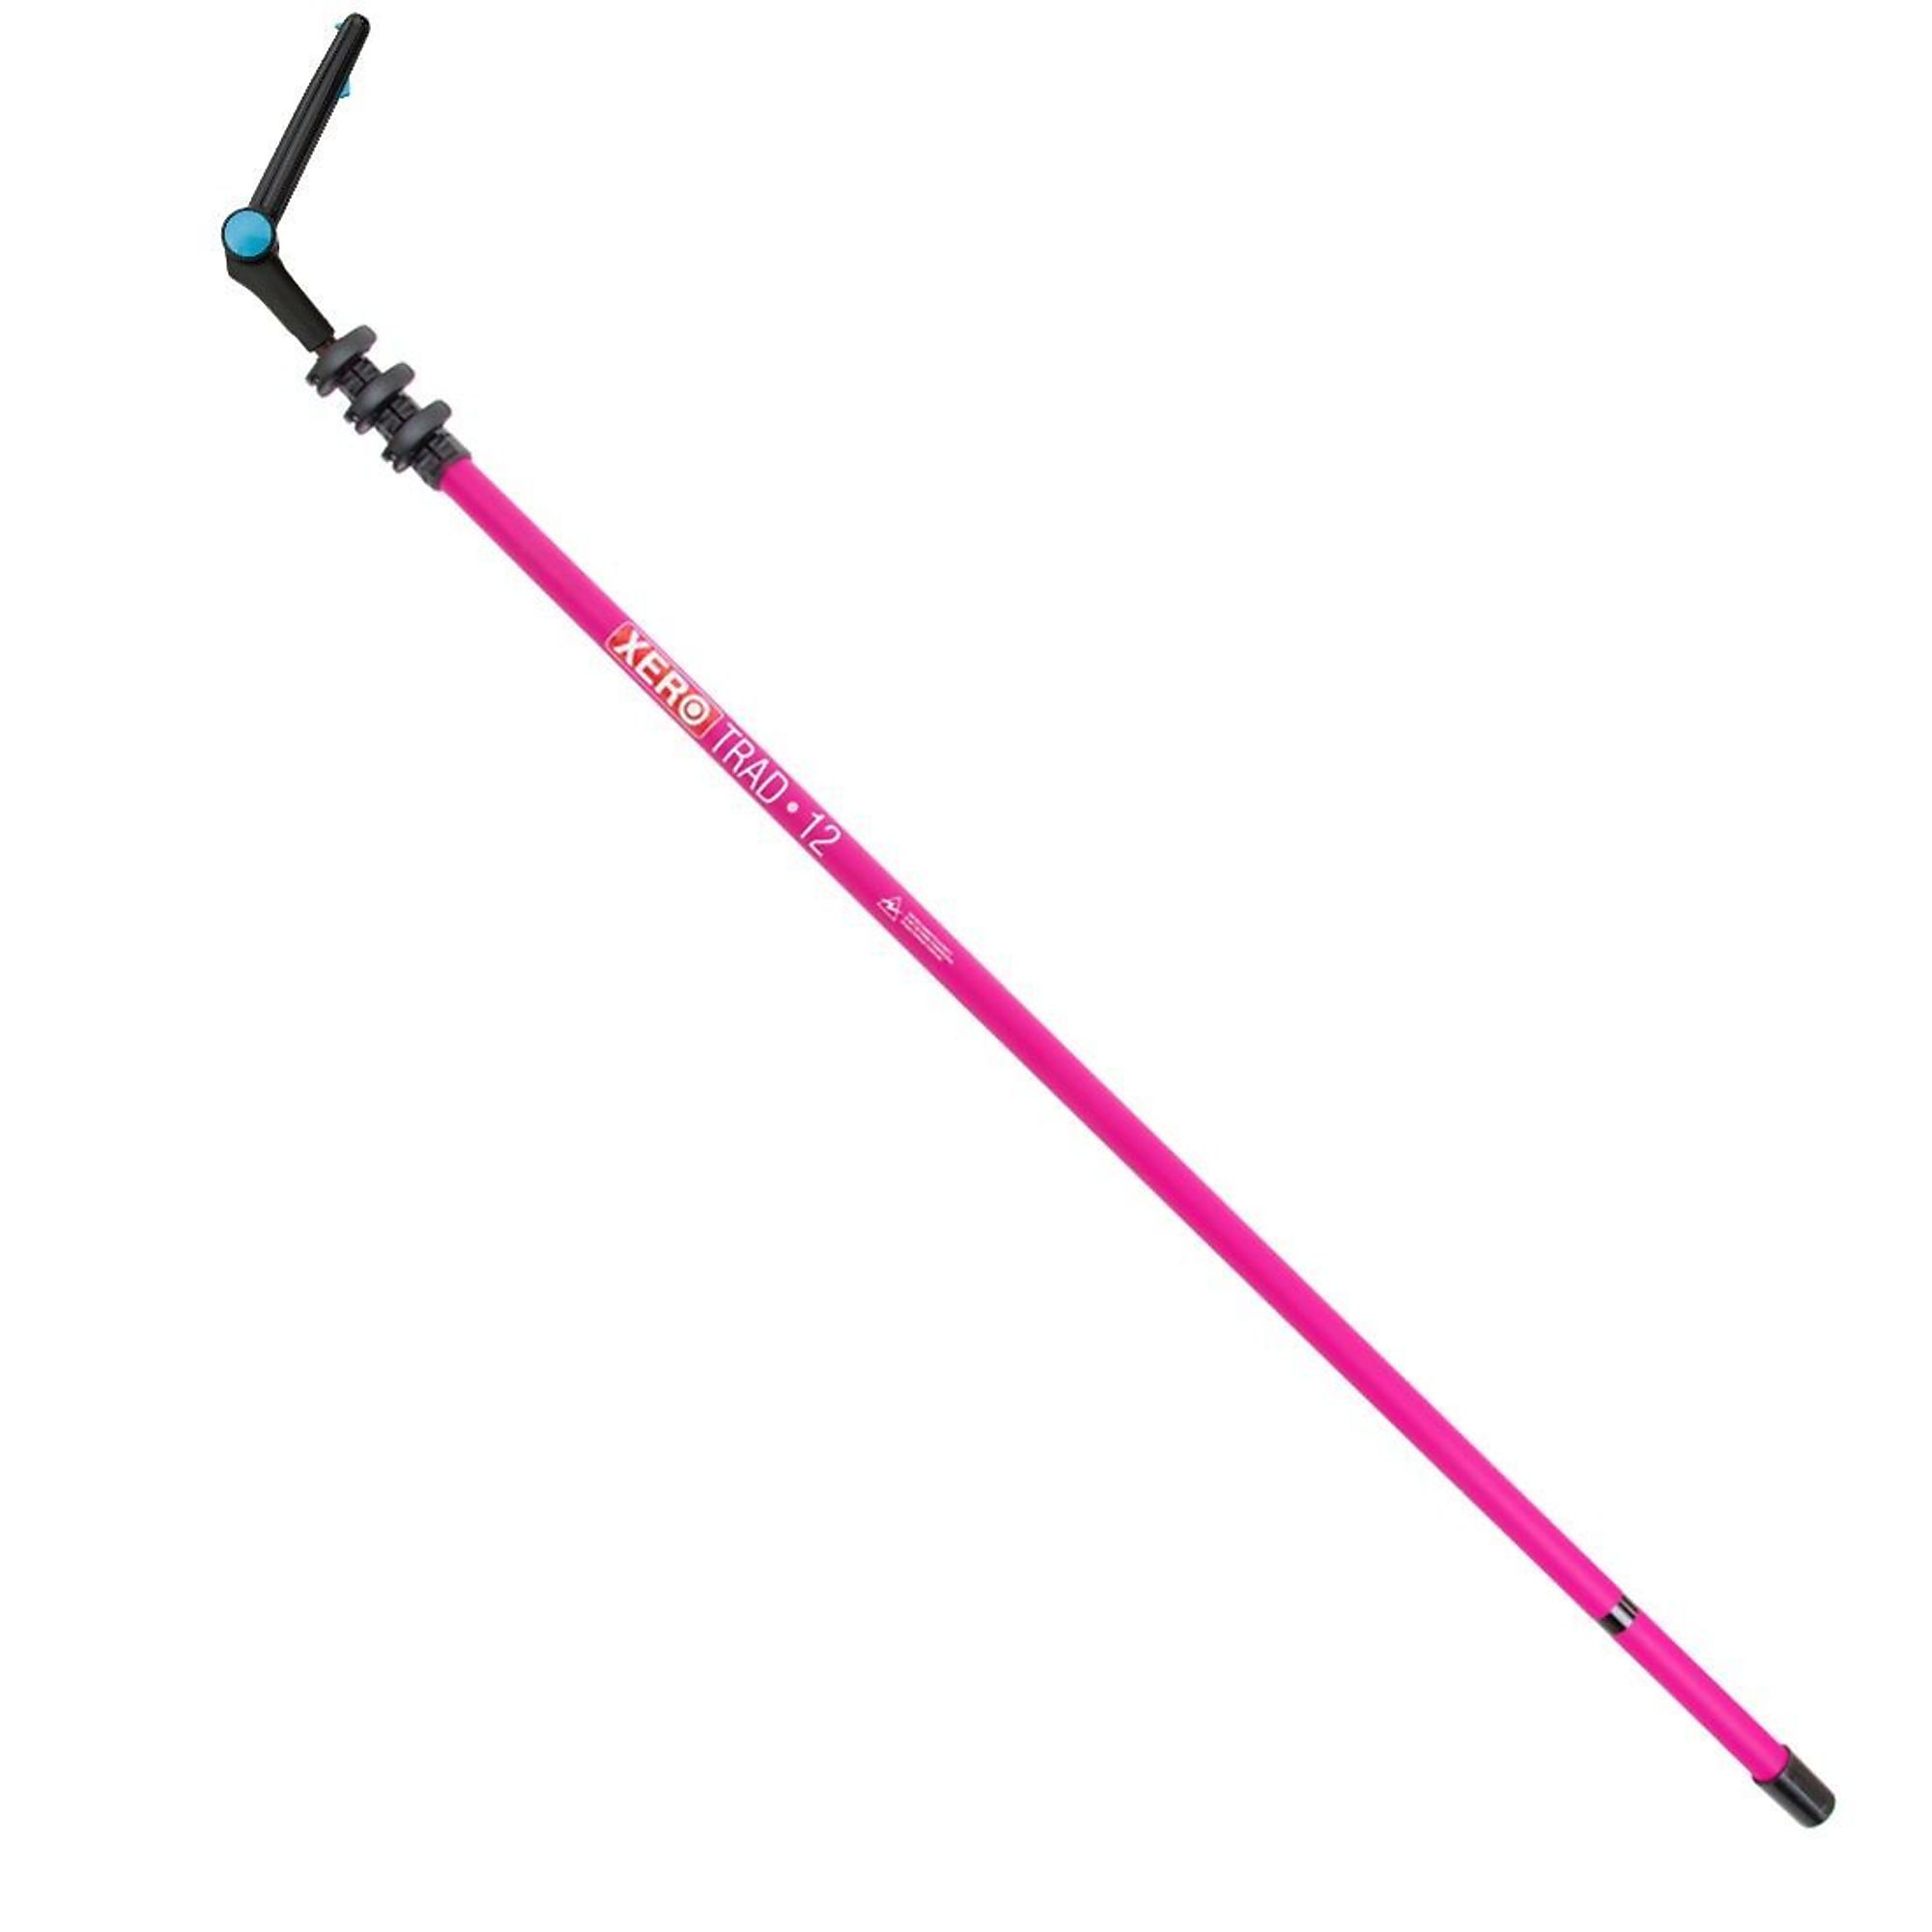 XERO, Trad Pole 2.0 Dr Angle Tip - Hot Pink 12ft., Model 209-20-421